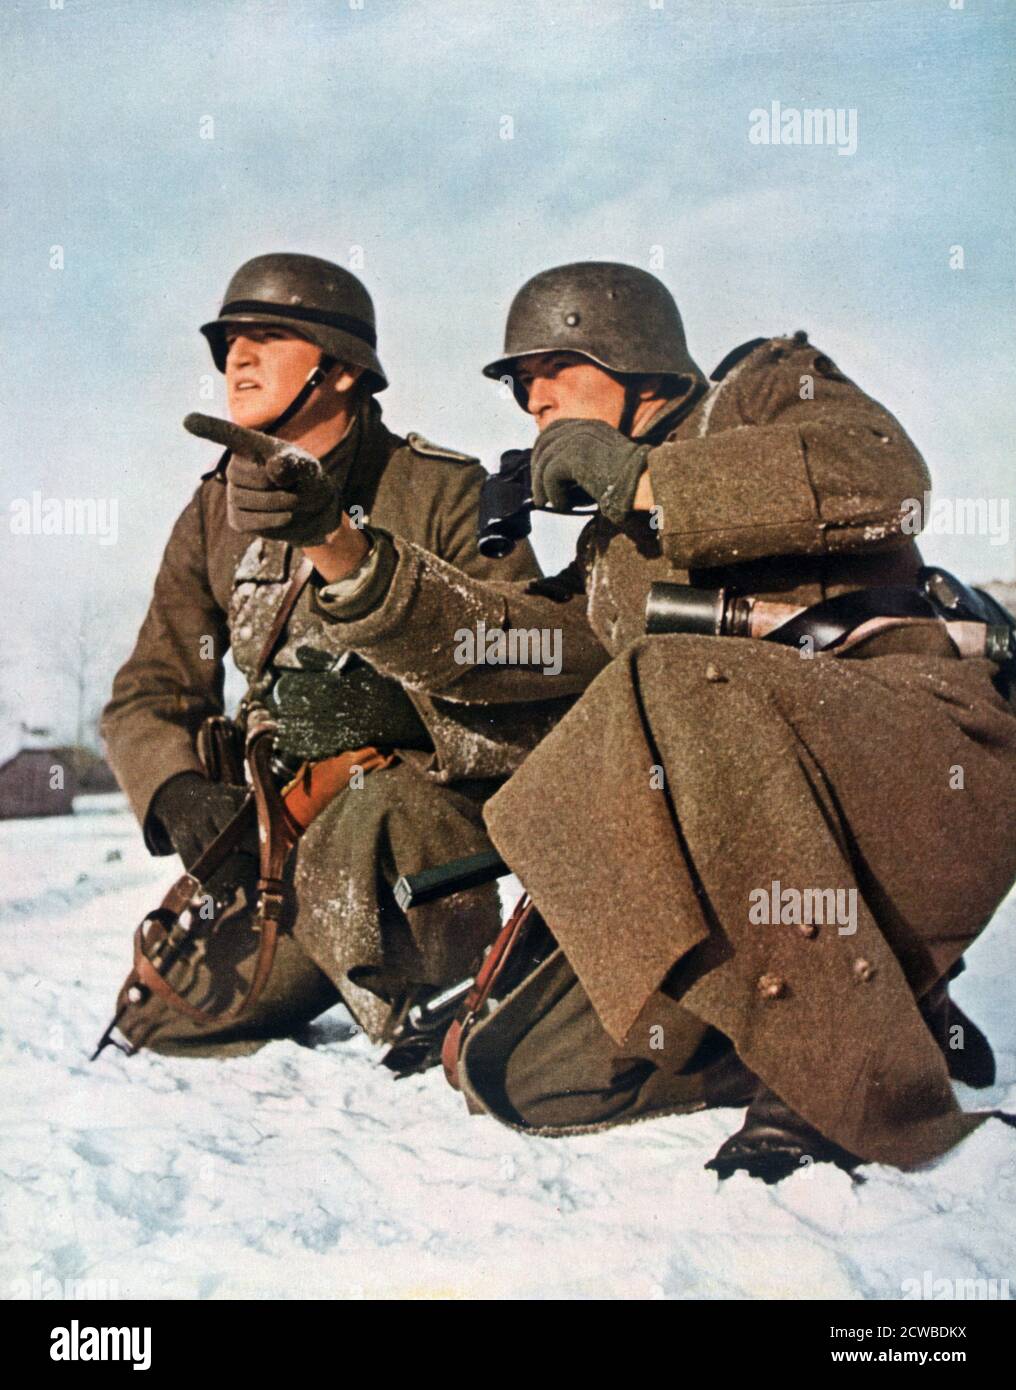 German soldiers, World War II, 1942. A print from Signal, March 1942. Signal was a magazine published by the German Third Reich from 1940 to 1945. By the German photographer Grimm. Stock Photo